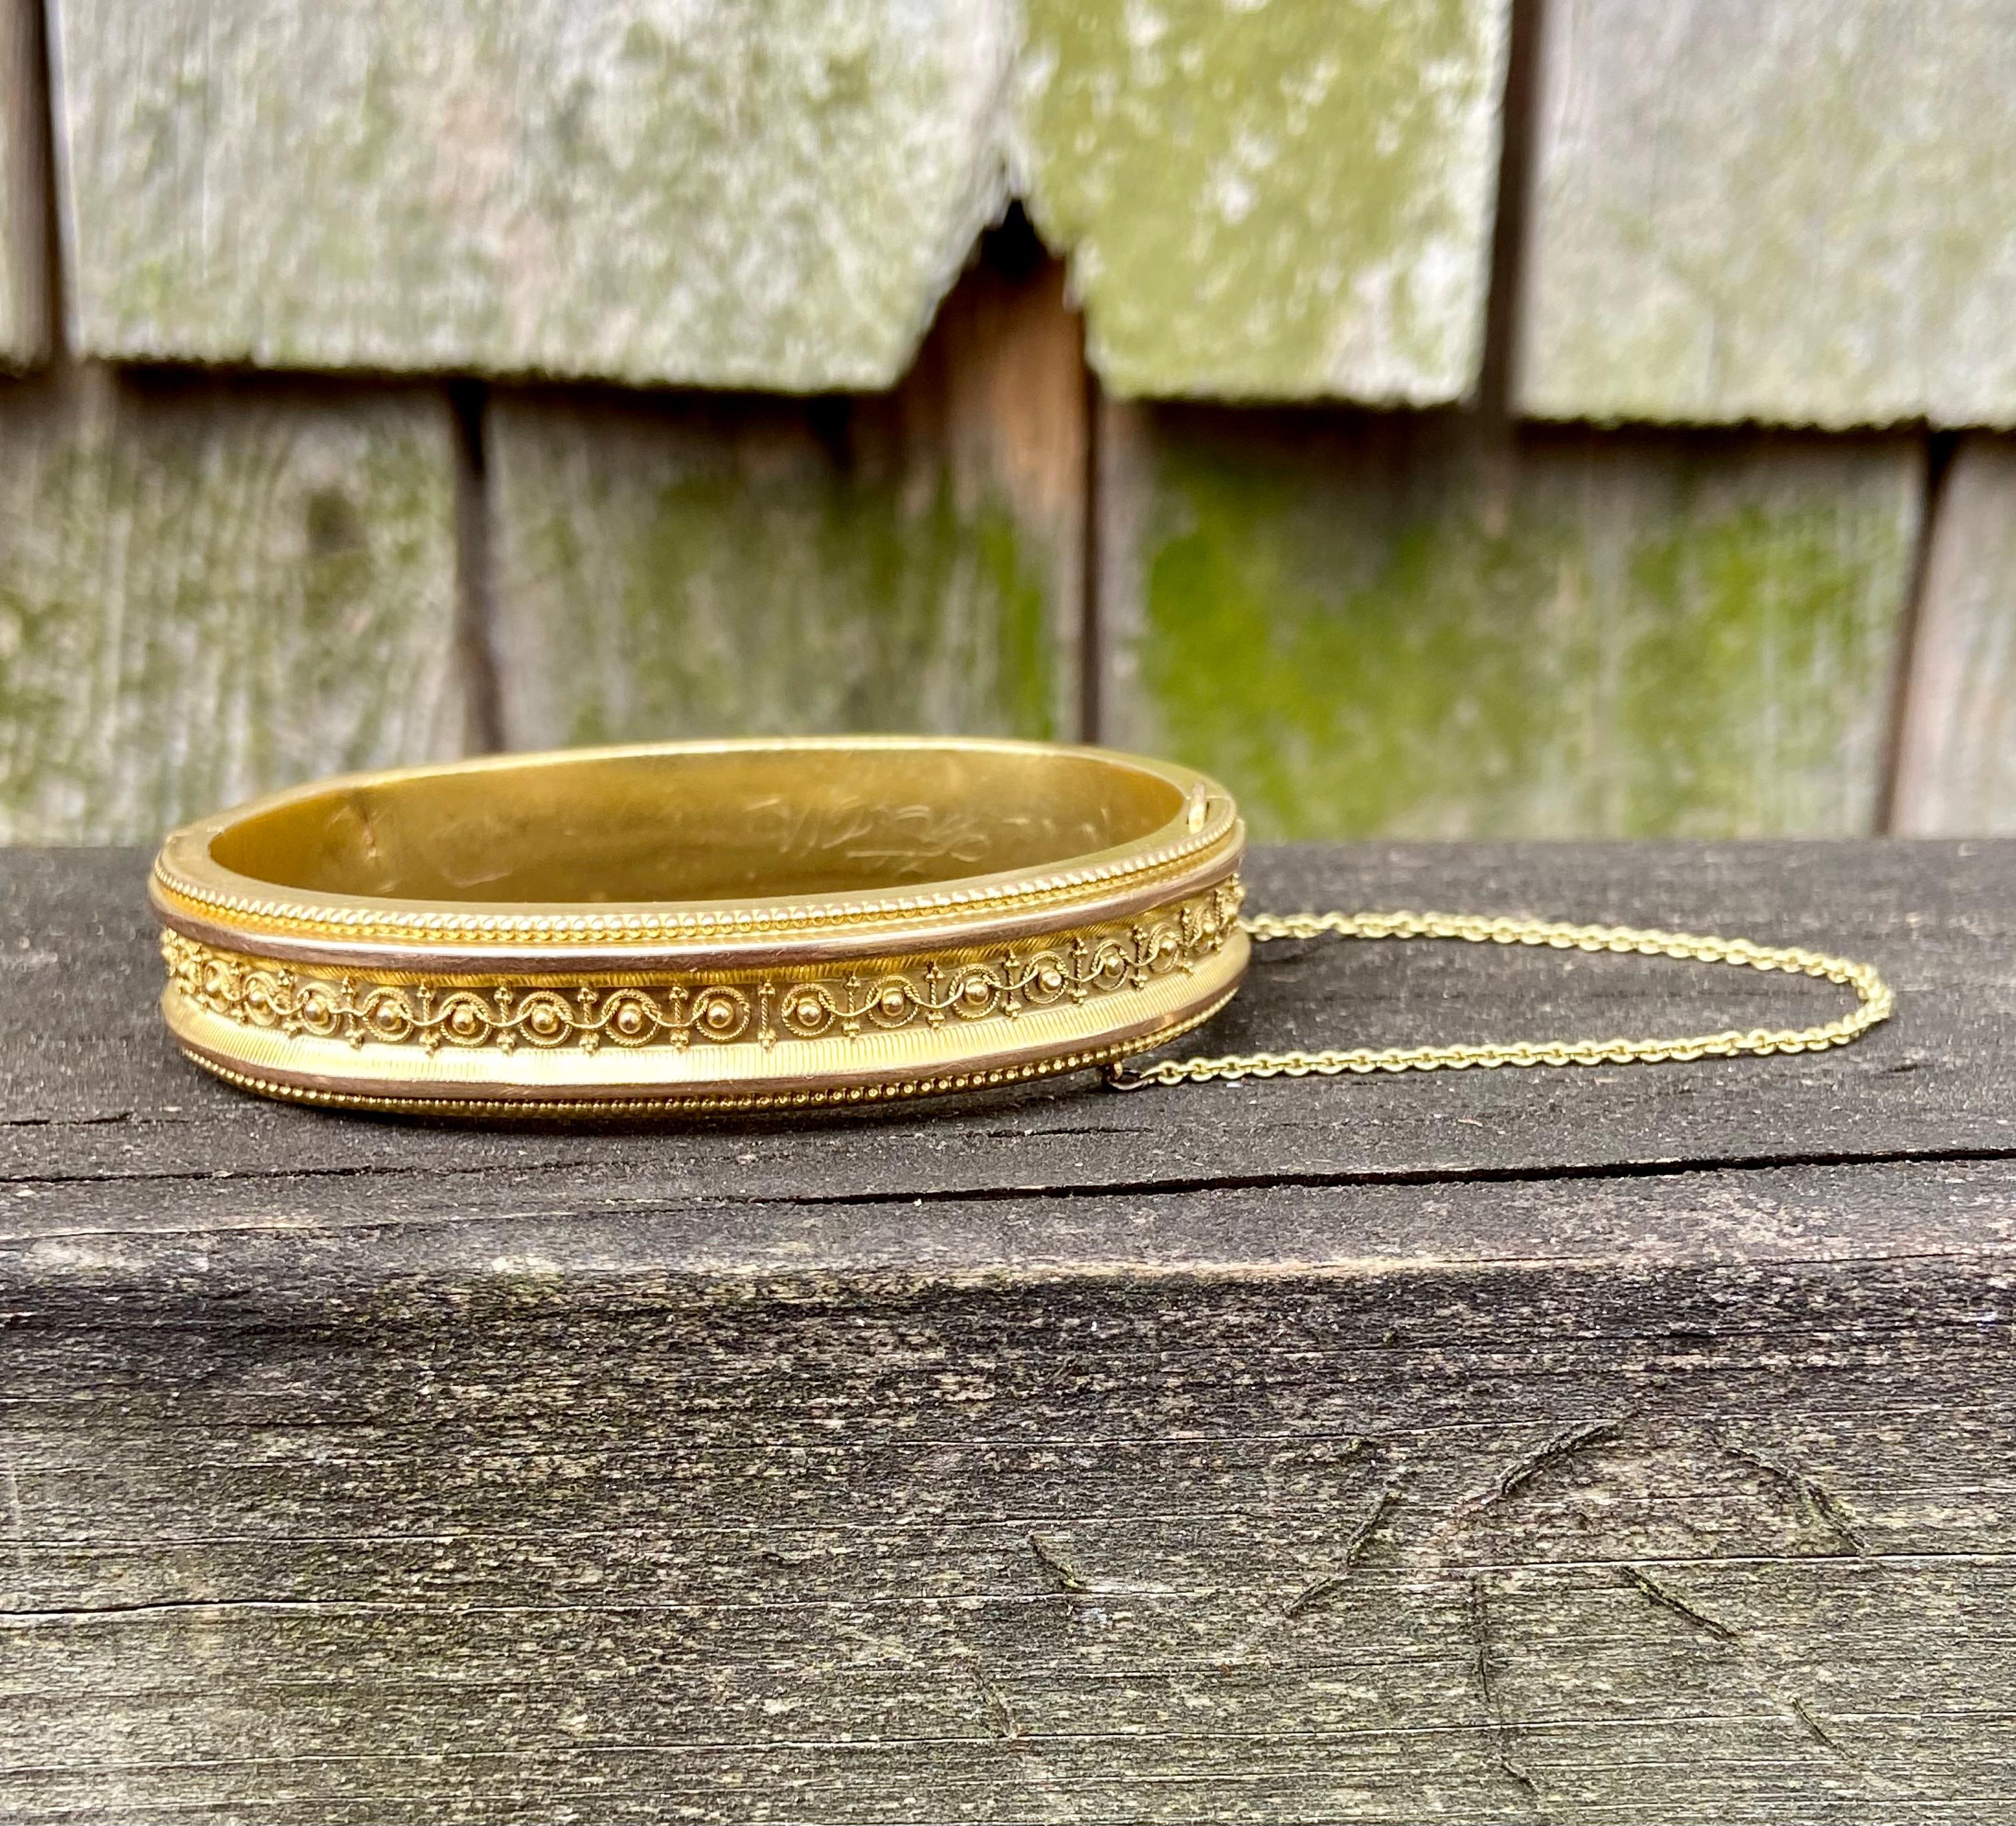 One 14 karat yellow gold Victorian bracelet measuring 2.25 inches in diameter complete with hidden closure and safety chain.  The bracelet is intended for smaller wrists.  